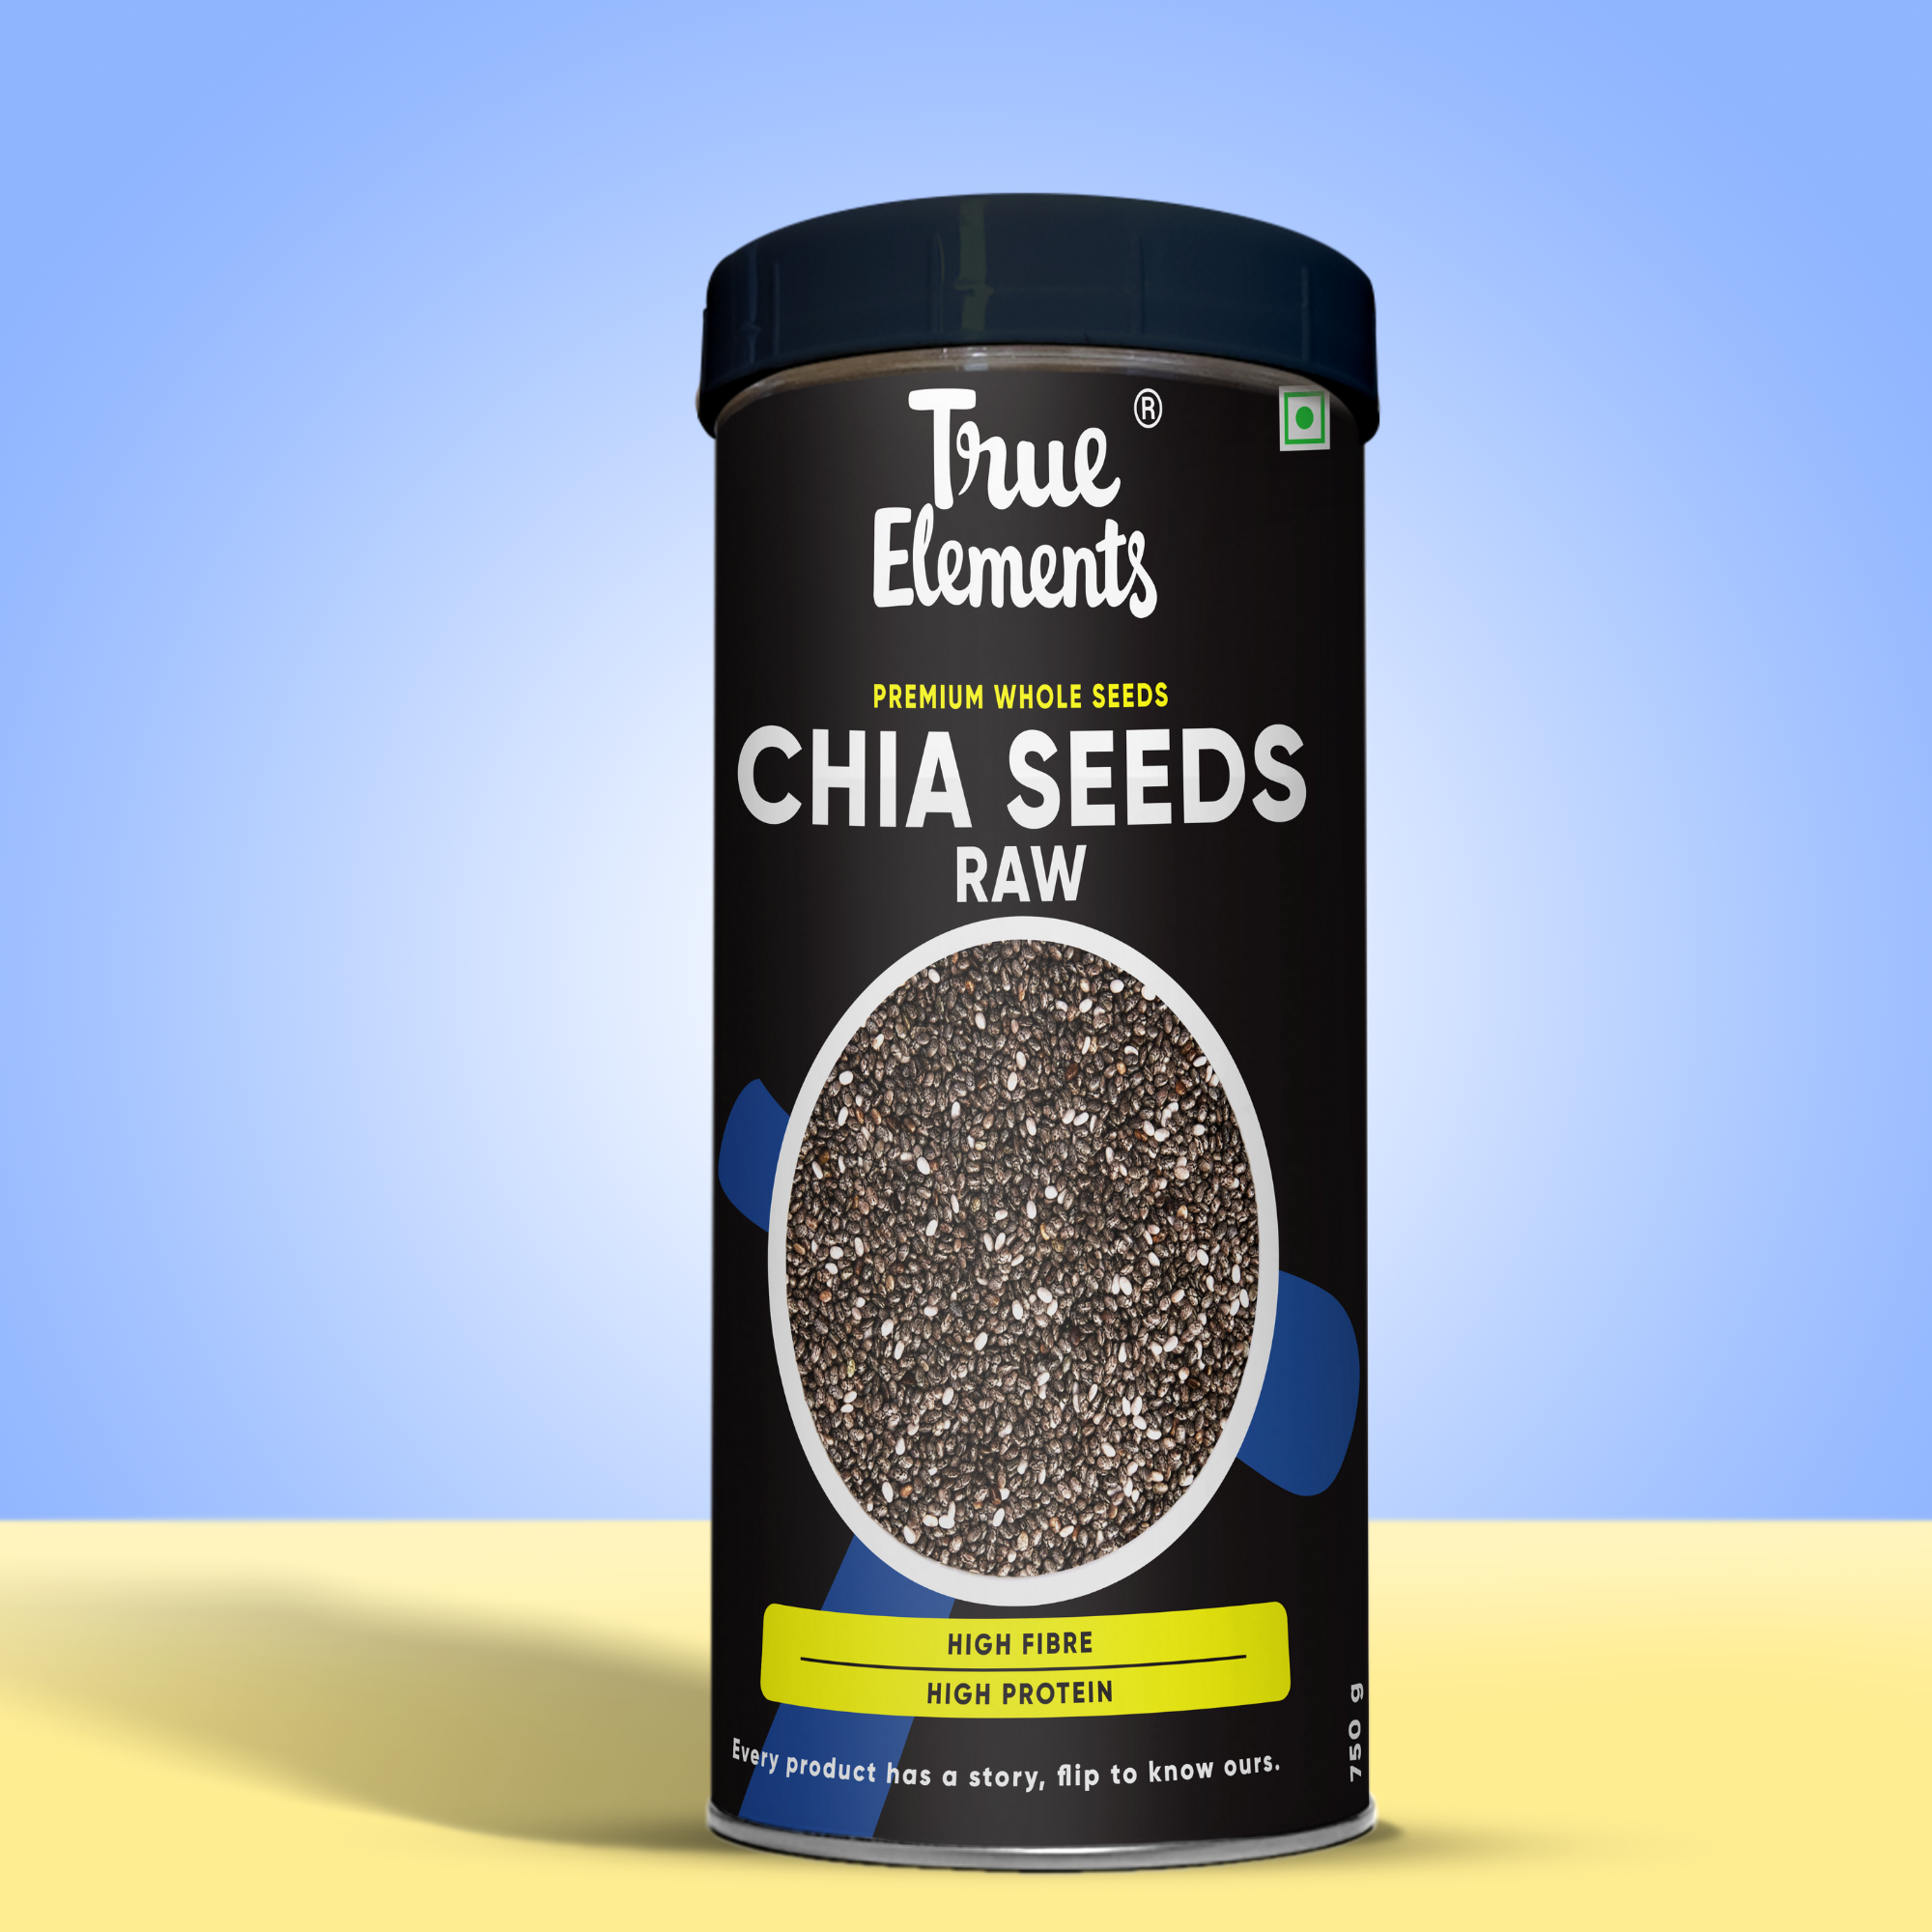 True elements raw chia seeds 720g (Premium Whole Seeds)